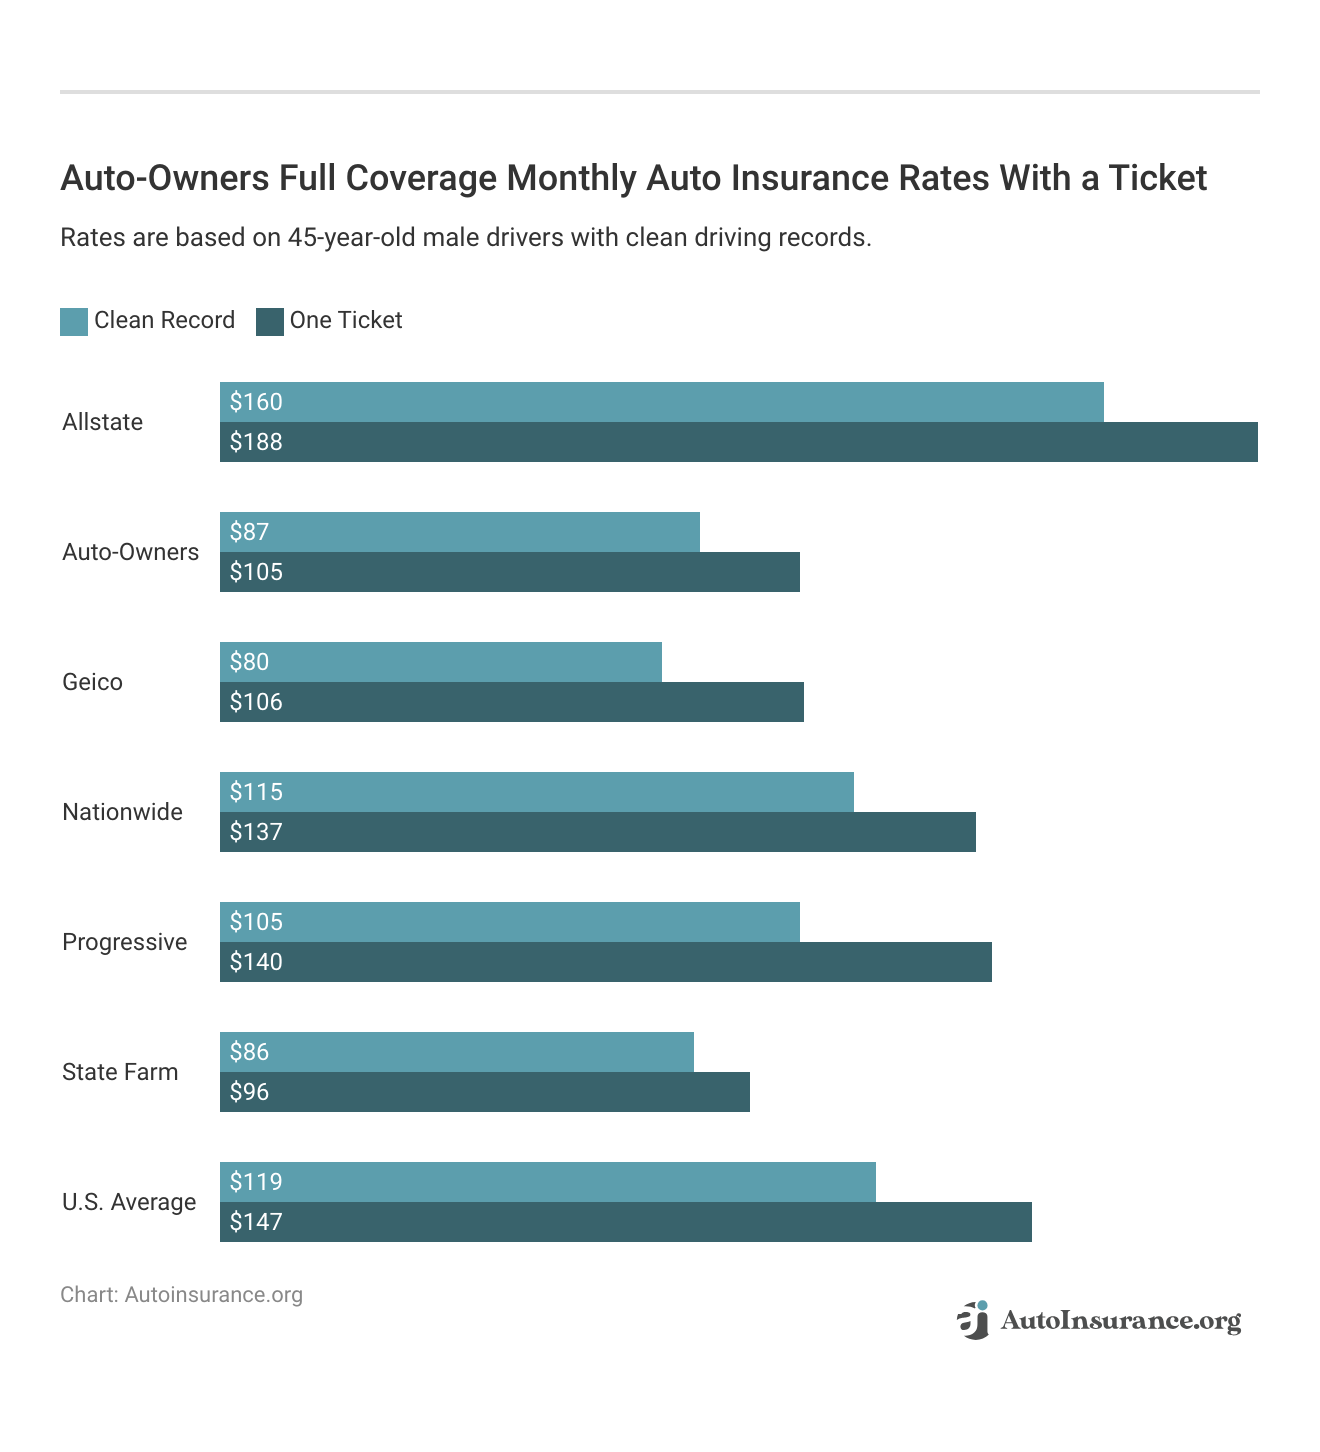 <h3>Auto-Owners Full Coverage Monthly Auto Insurance Rates With a Ticket</h3>